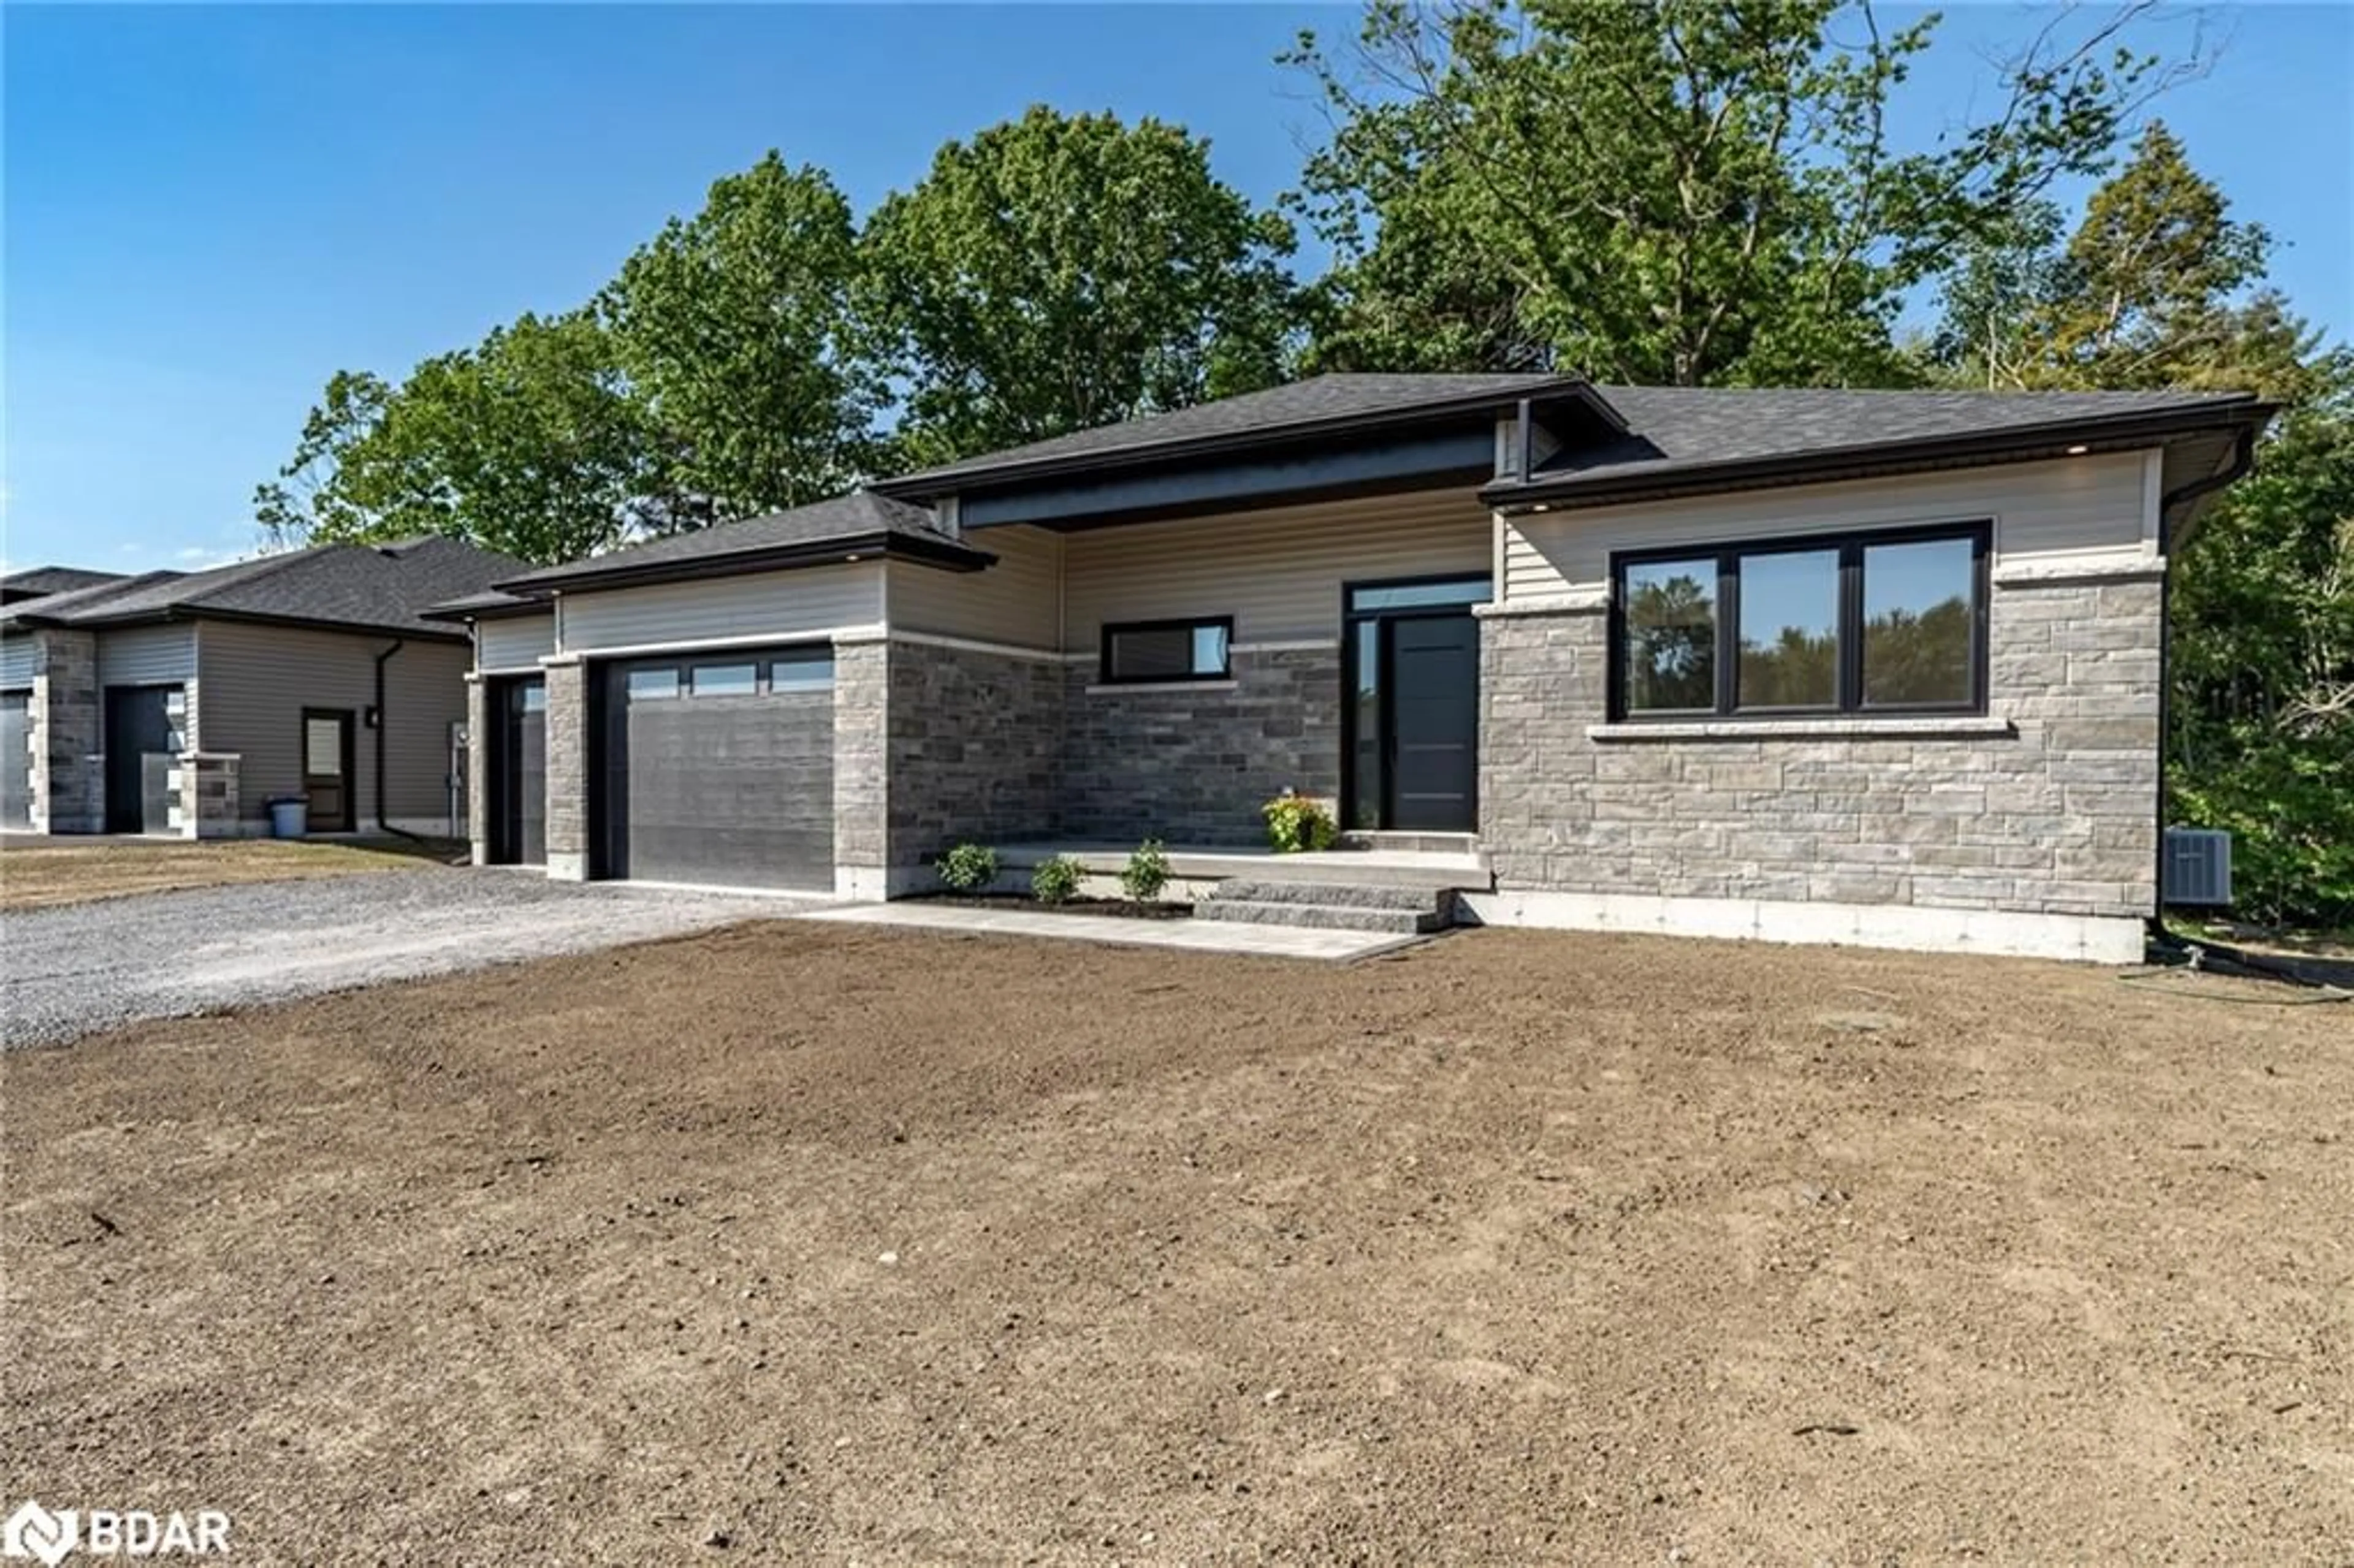 Home with brick exterior material for 131 MICHAELS'S N/A Way, Quinte West Ontario K0K 1L0